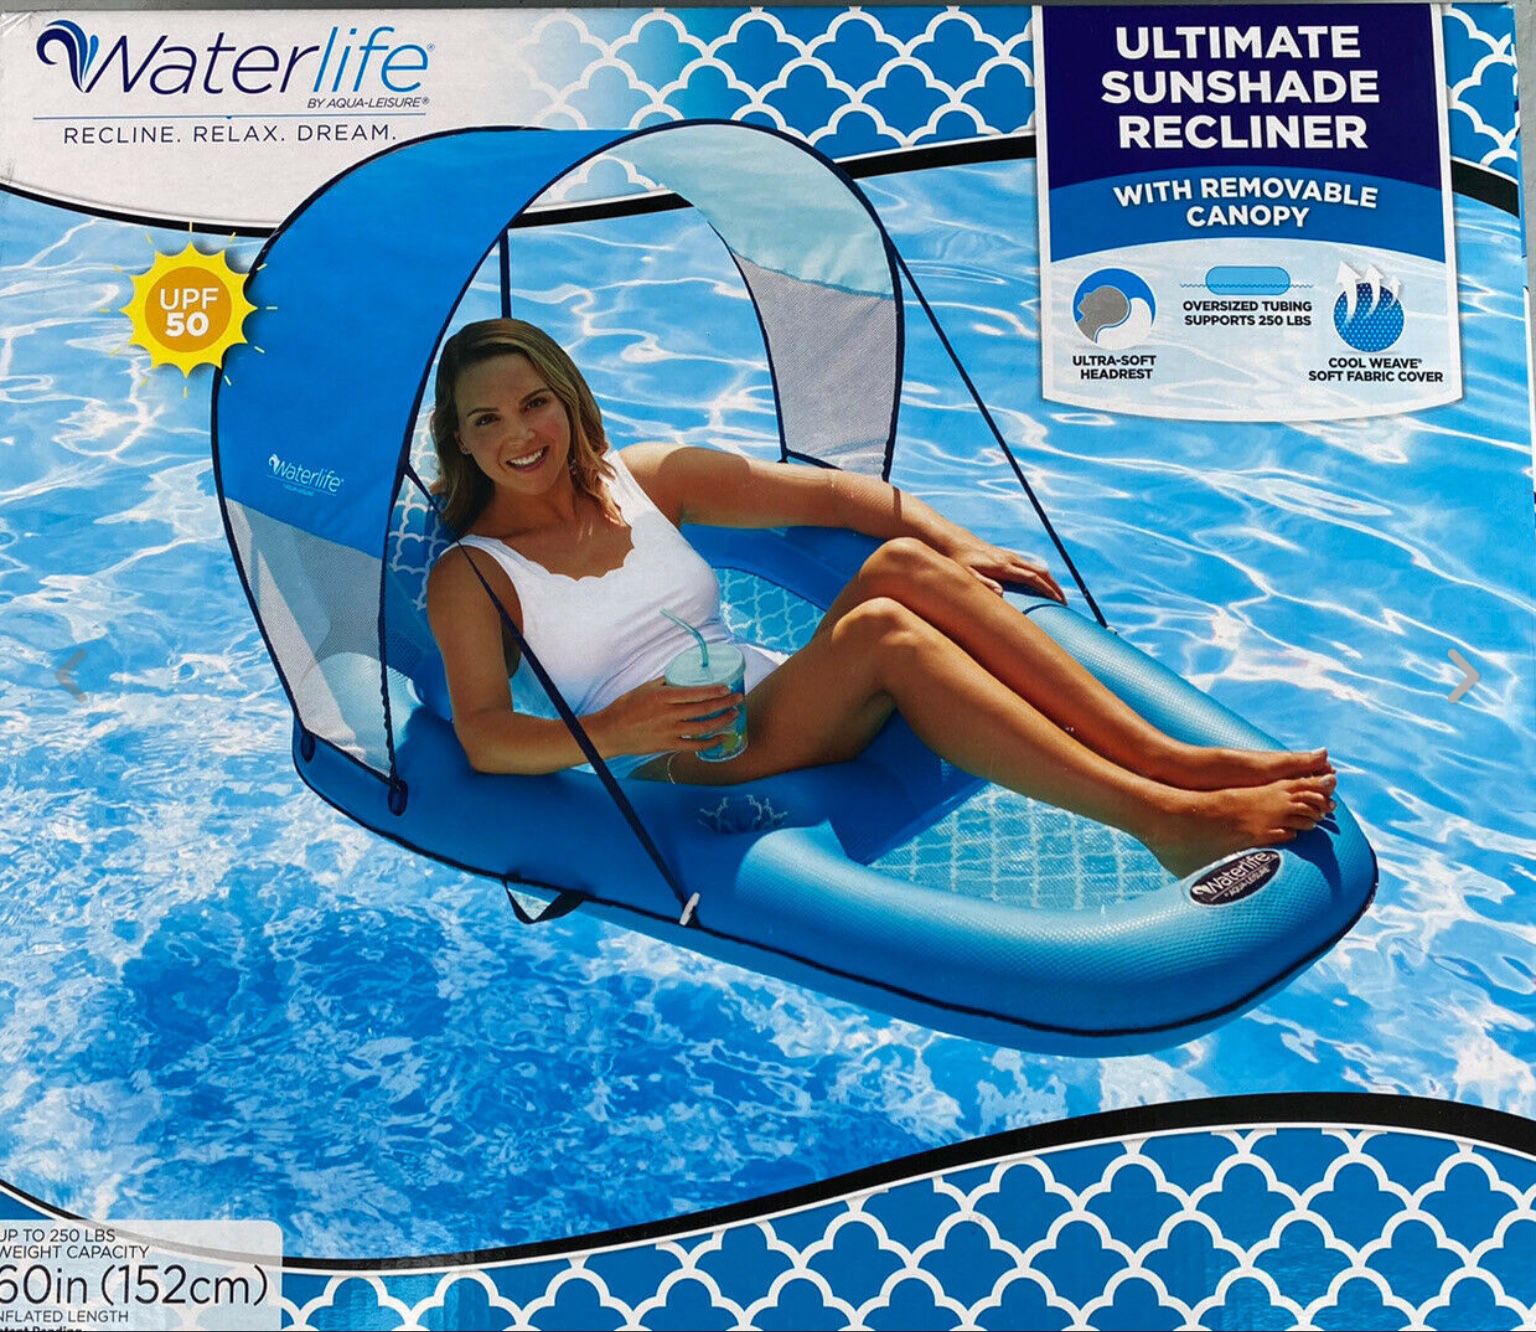 Relax in Luxury Ultimate Sunshade Recliner Lounge Pool inflatable w Canopy